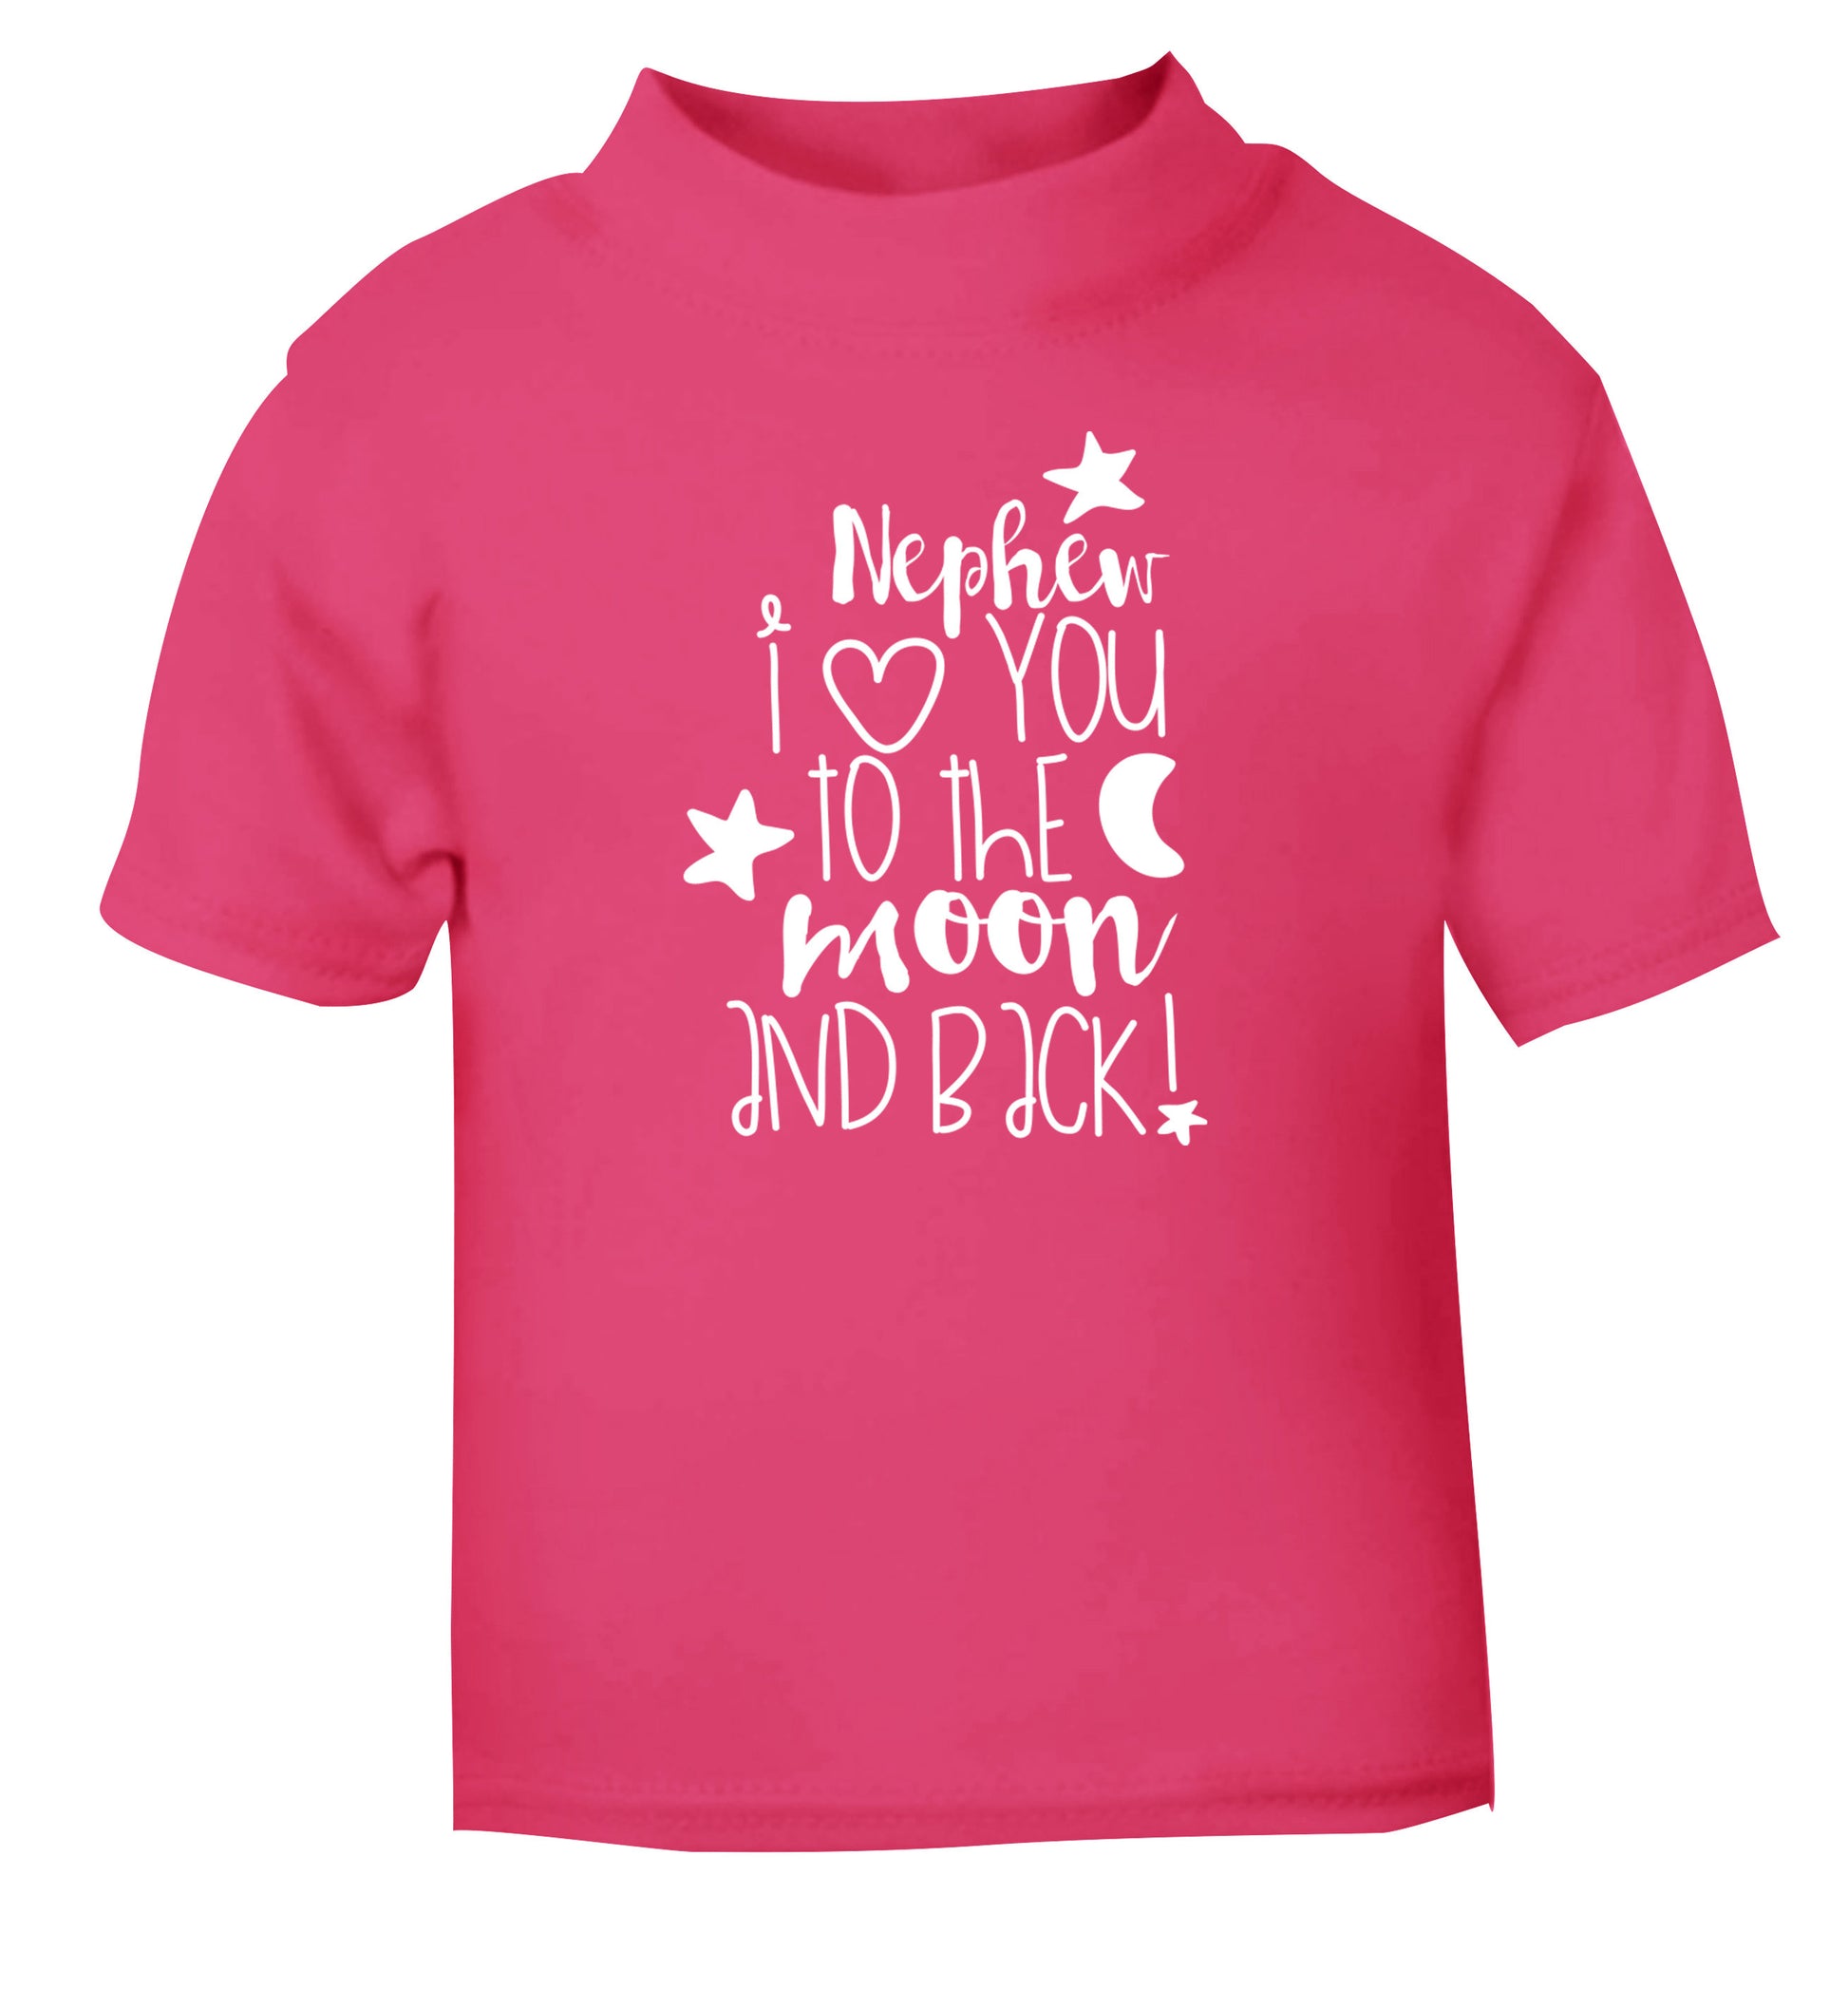 Nephew I love you to the moon and back pink Baby Toddler Tshirt 2 Years